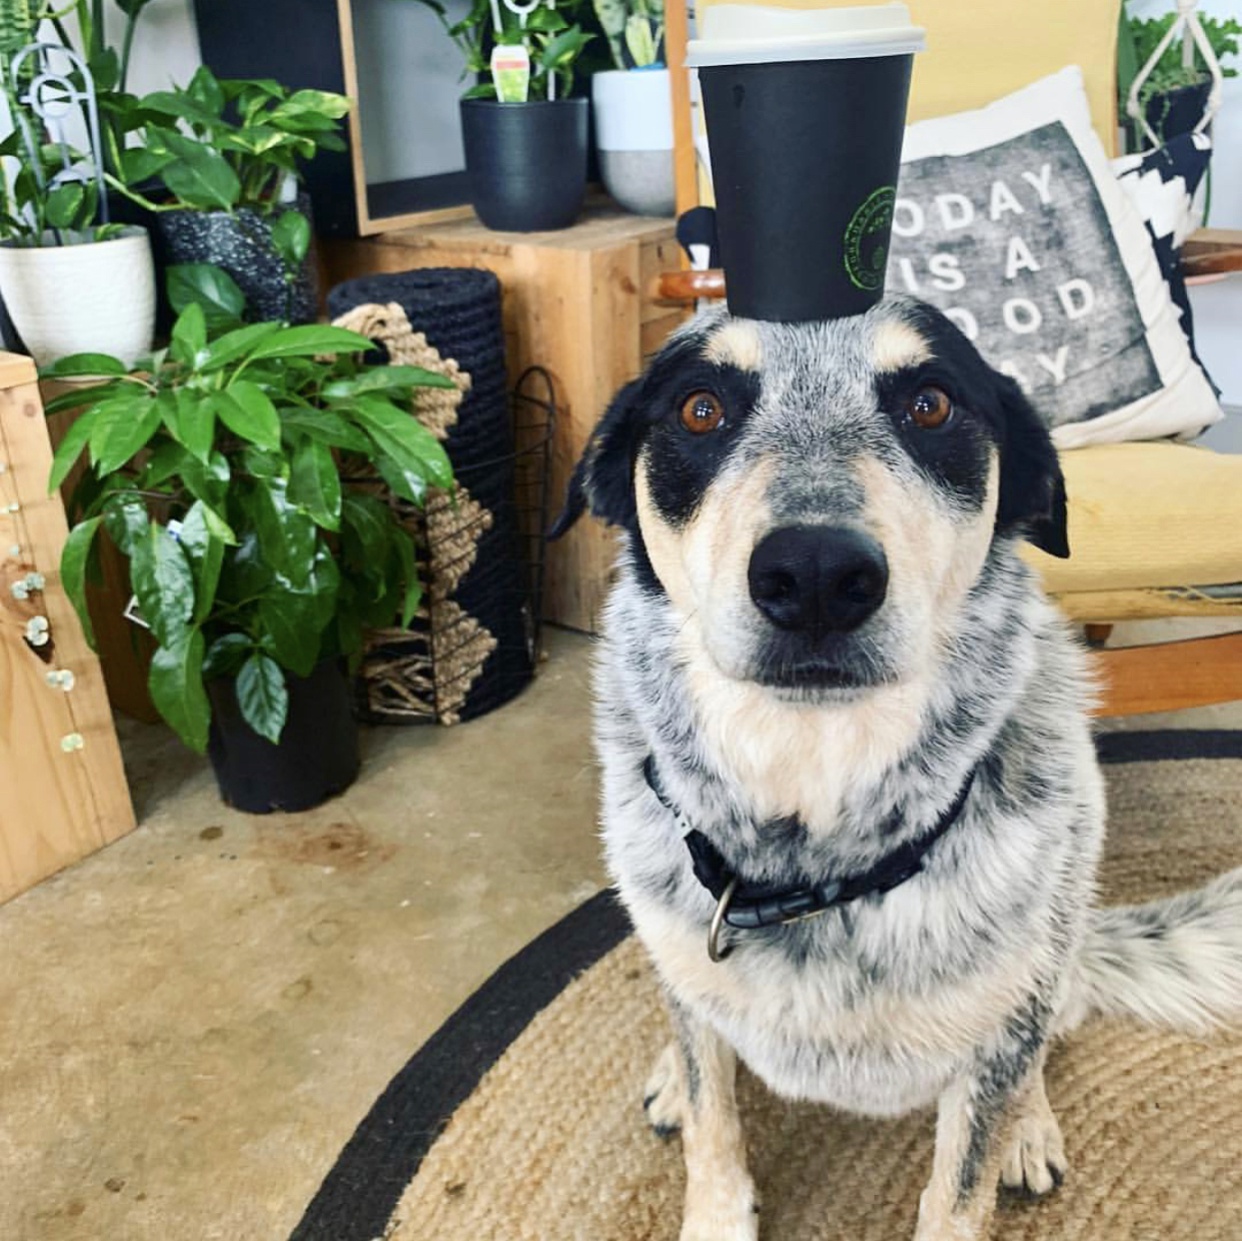 Top dog-friendly bars, breweries and cafes in Adelaide